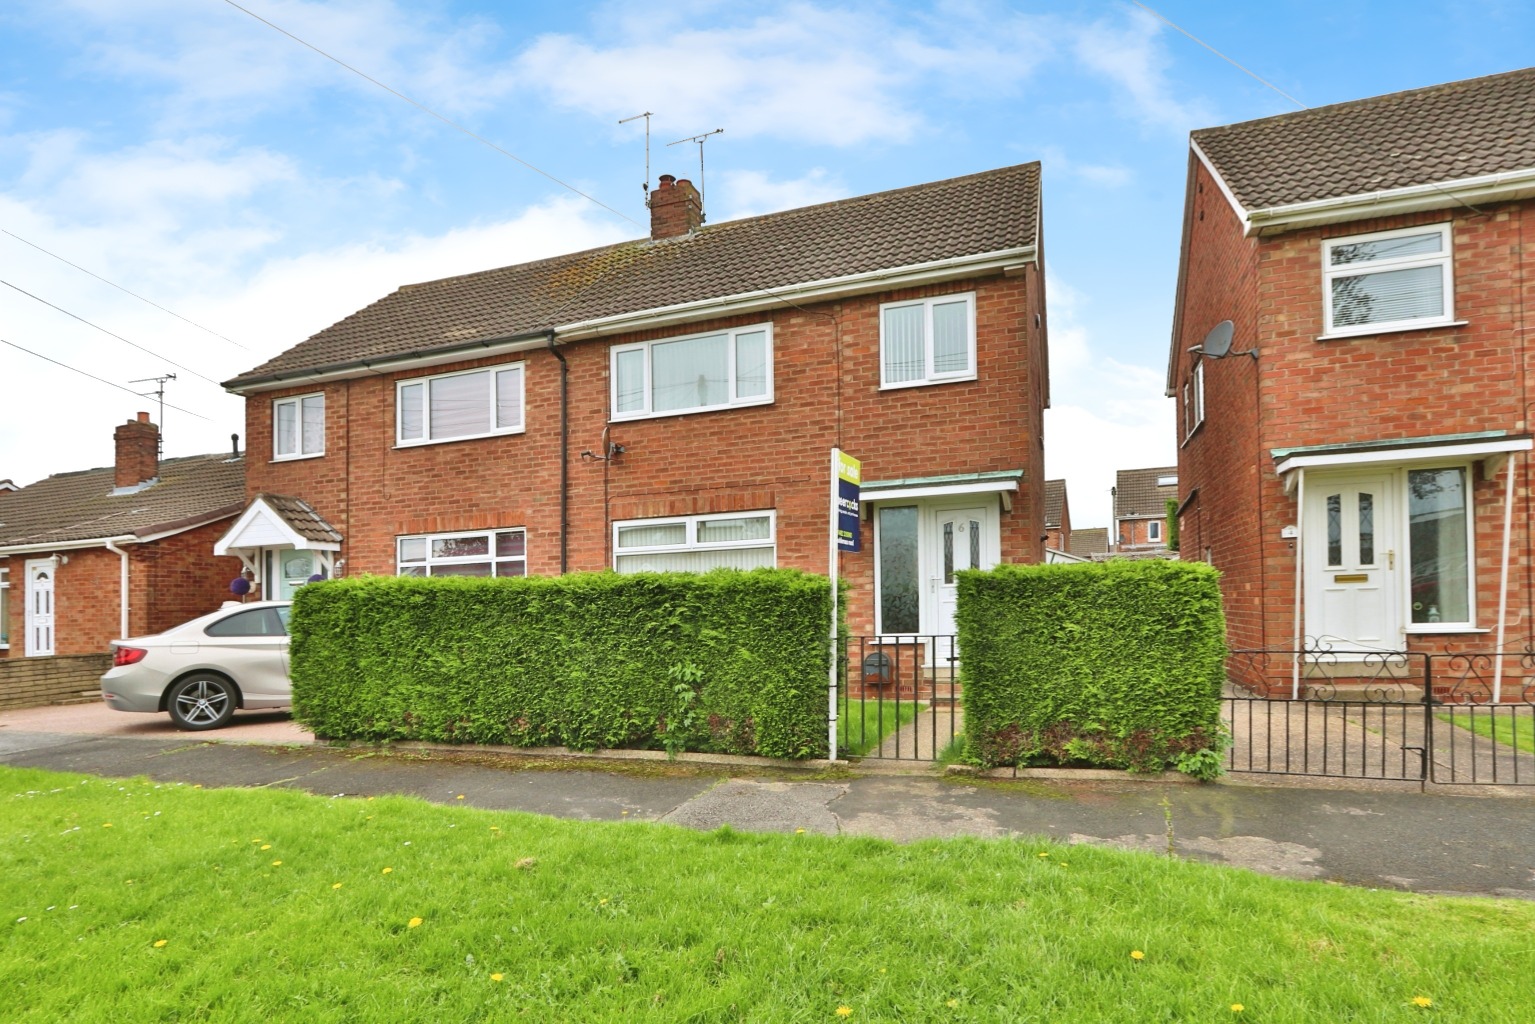 3 bed semi-detached house for sale in Maulson Drive, Hull - Property Image 1